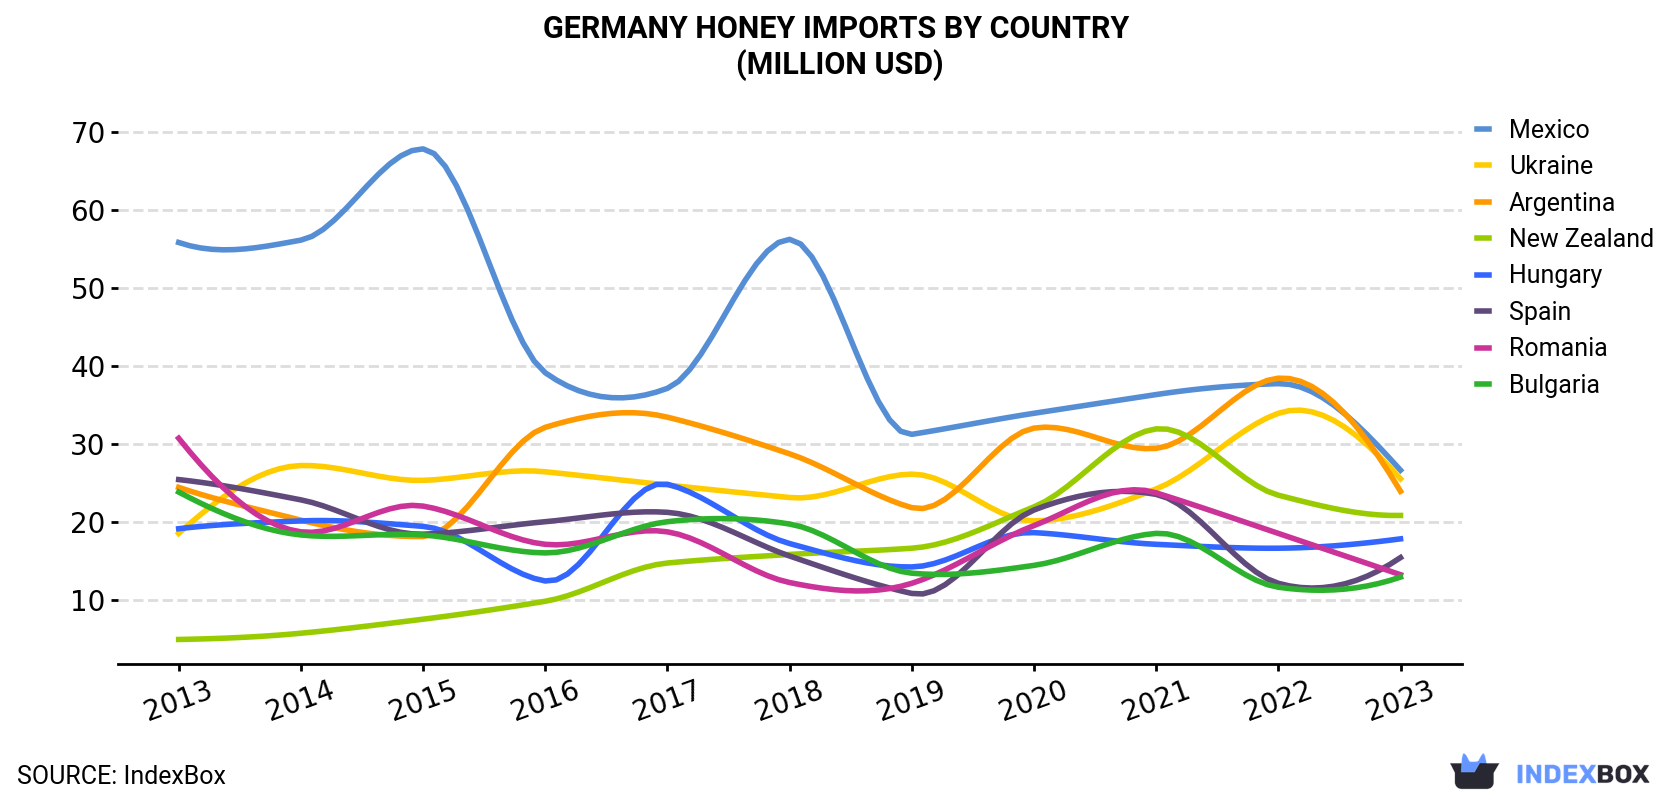 Germany Honey Imports By Country (Million USD)